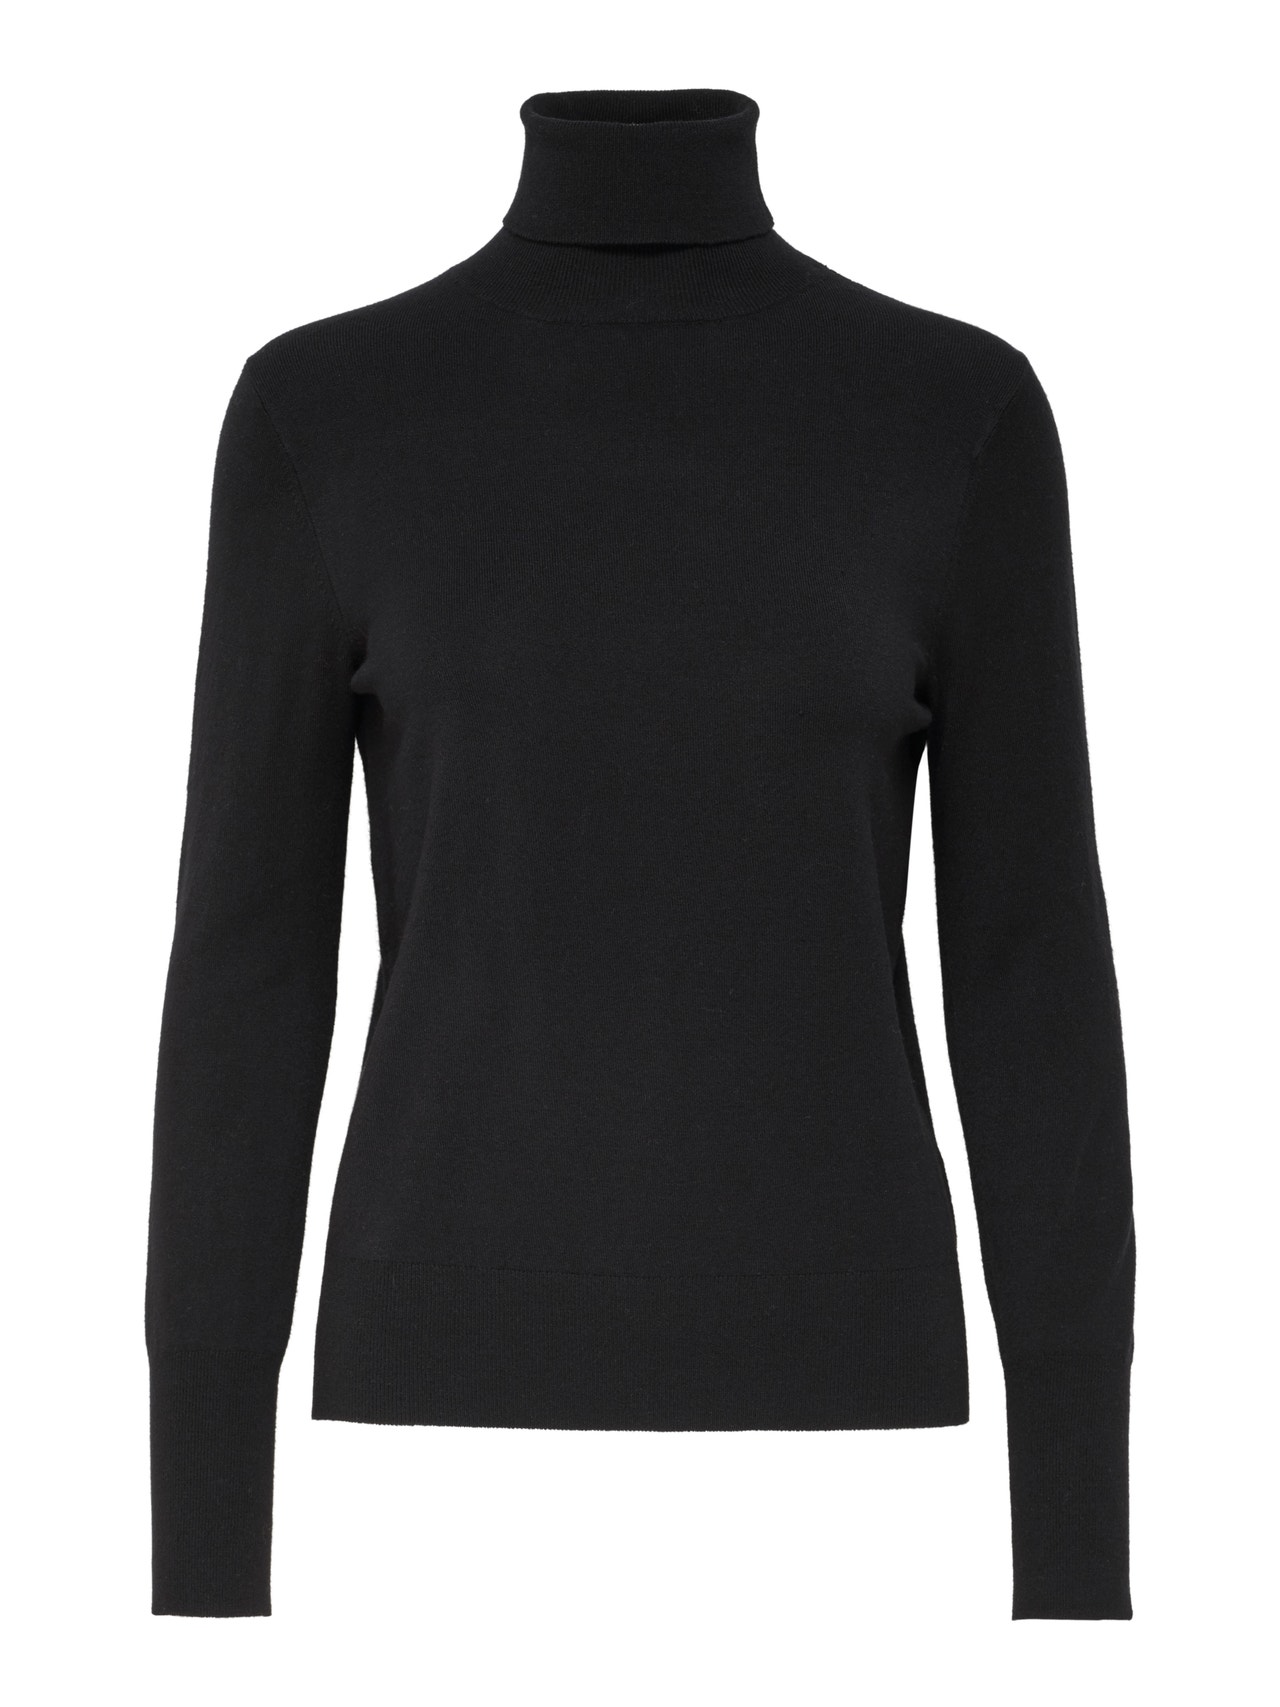 ONLY Rollneck Knitted Pullover -Black - 15183772